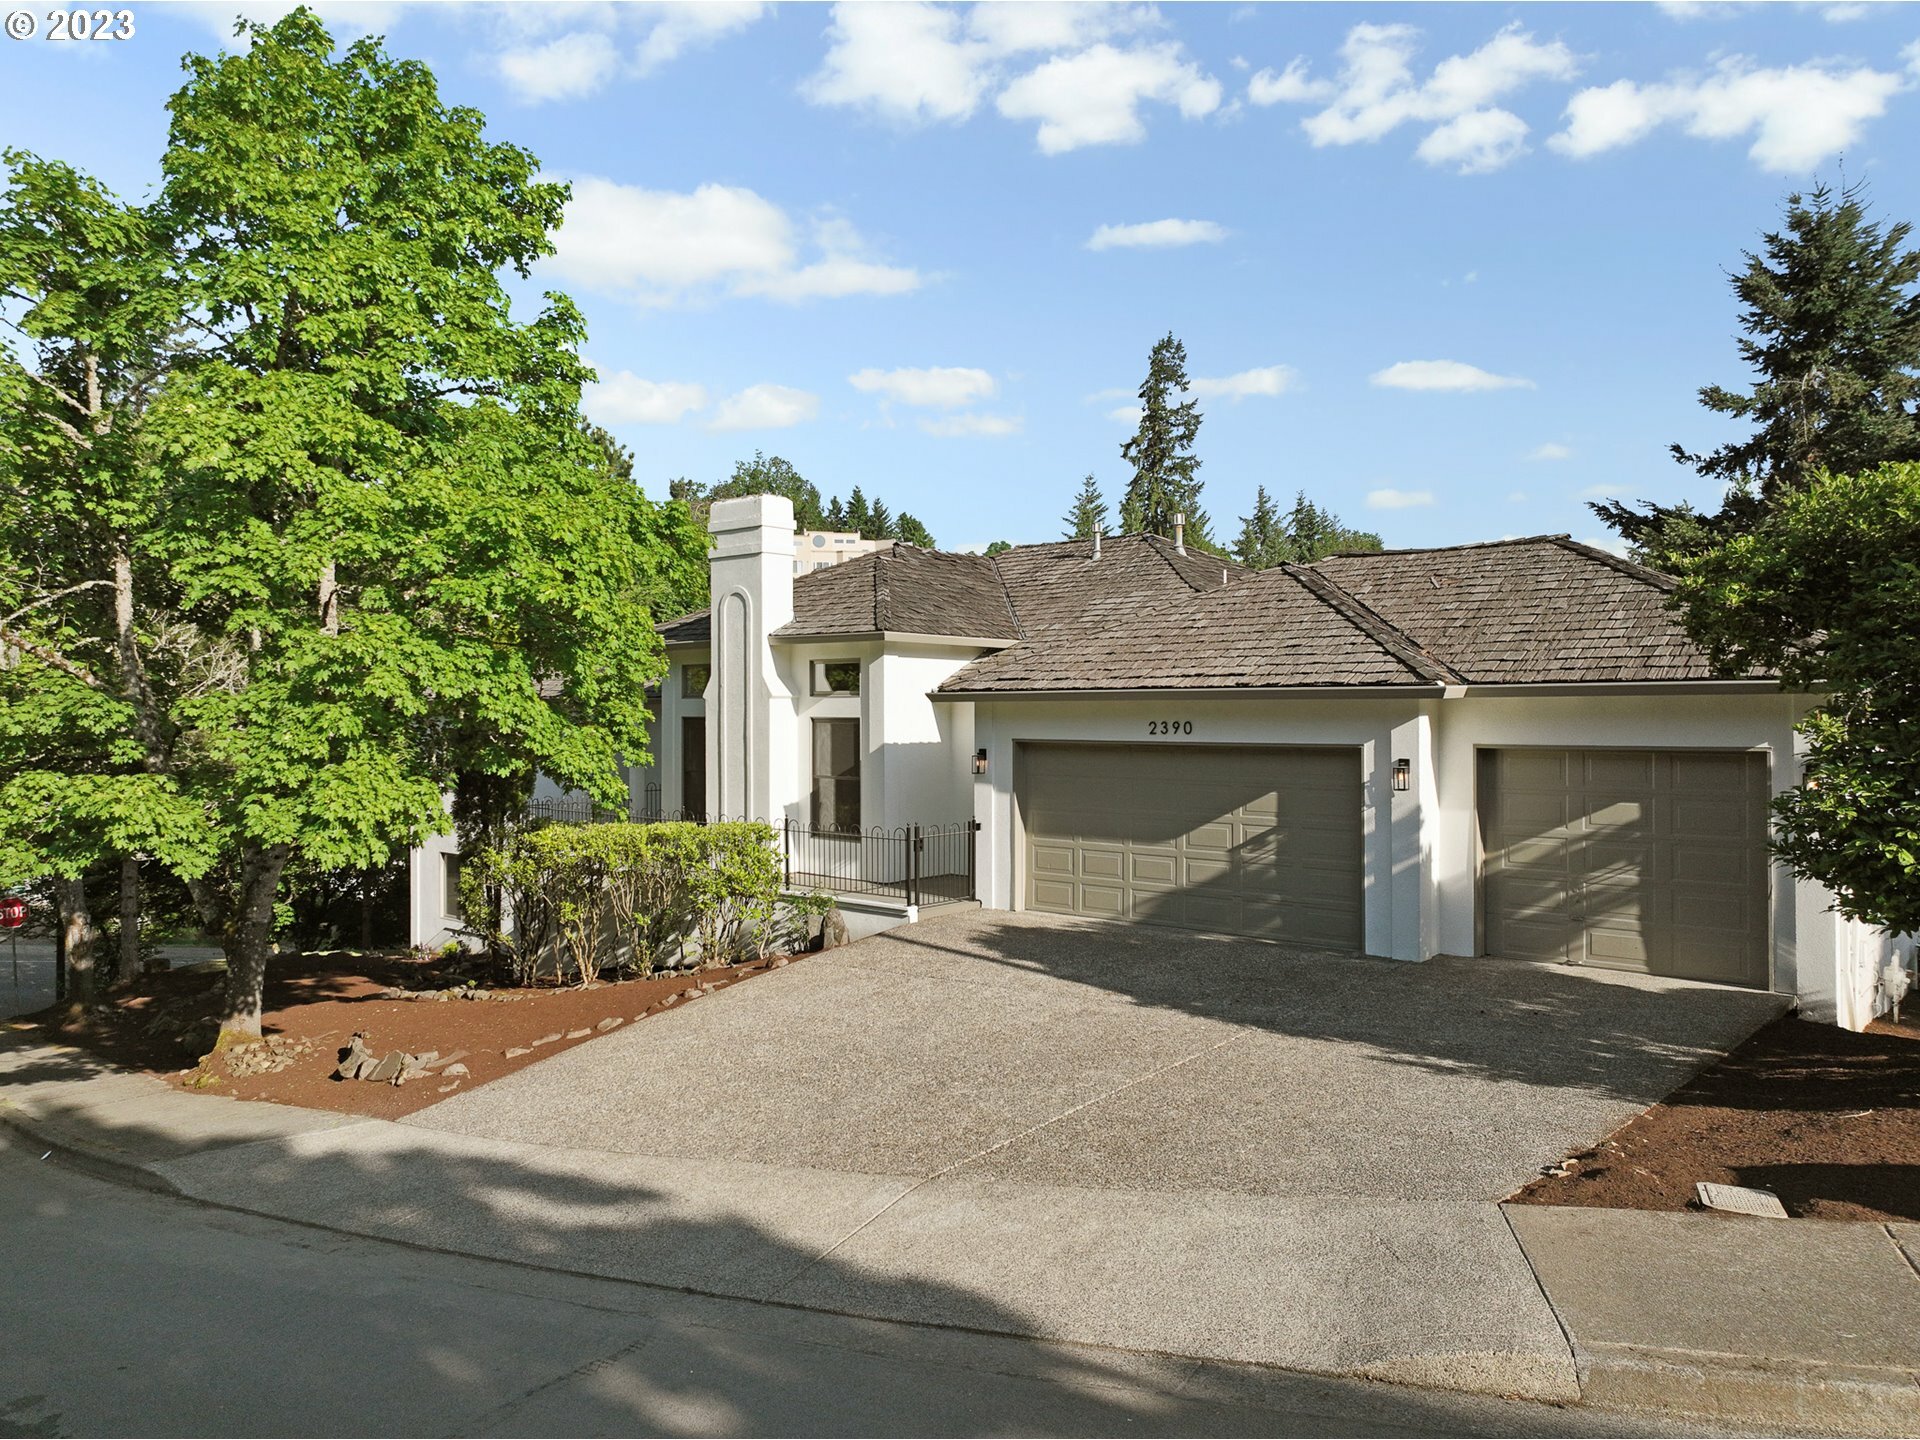 Property Photo:  2390 Falcon Dr  OR 97068 